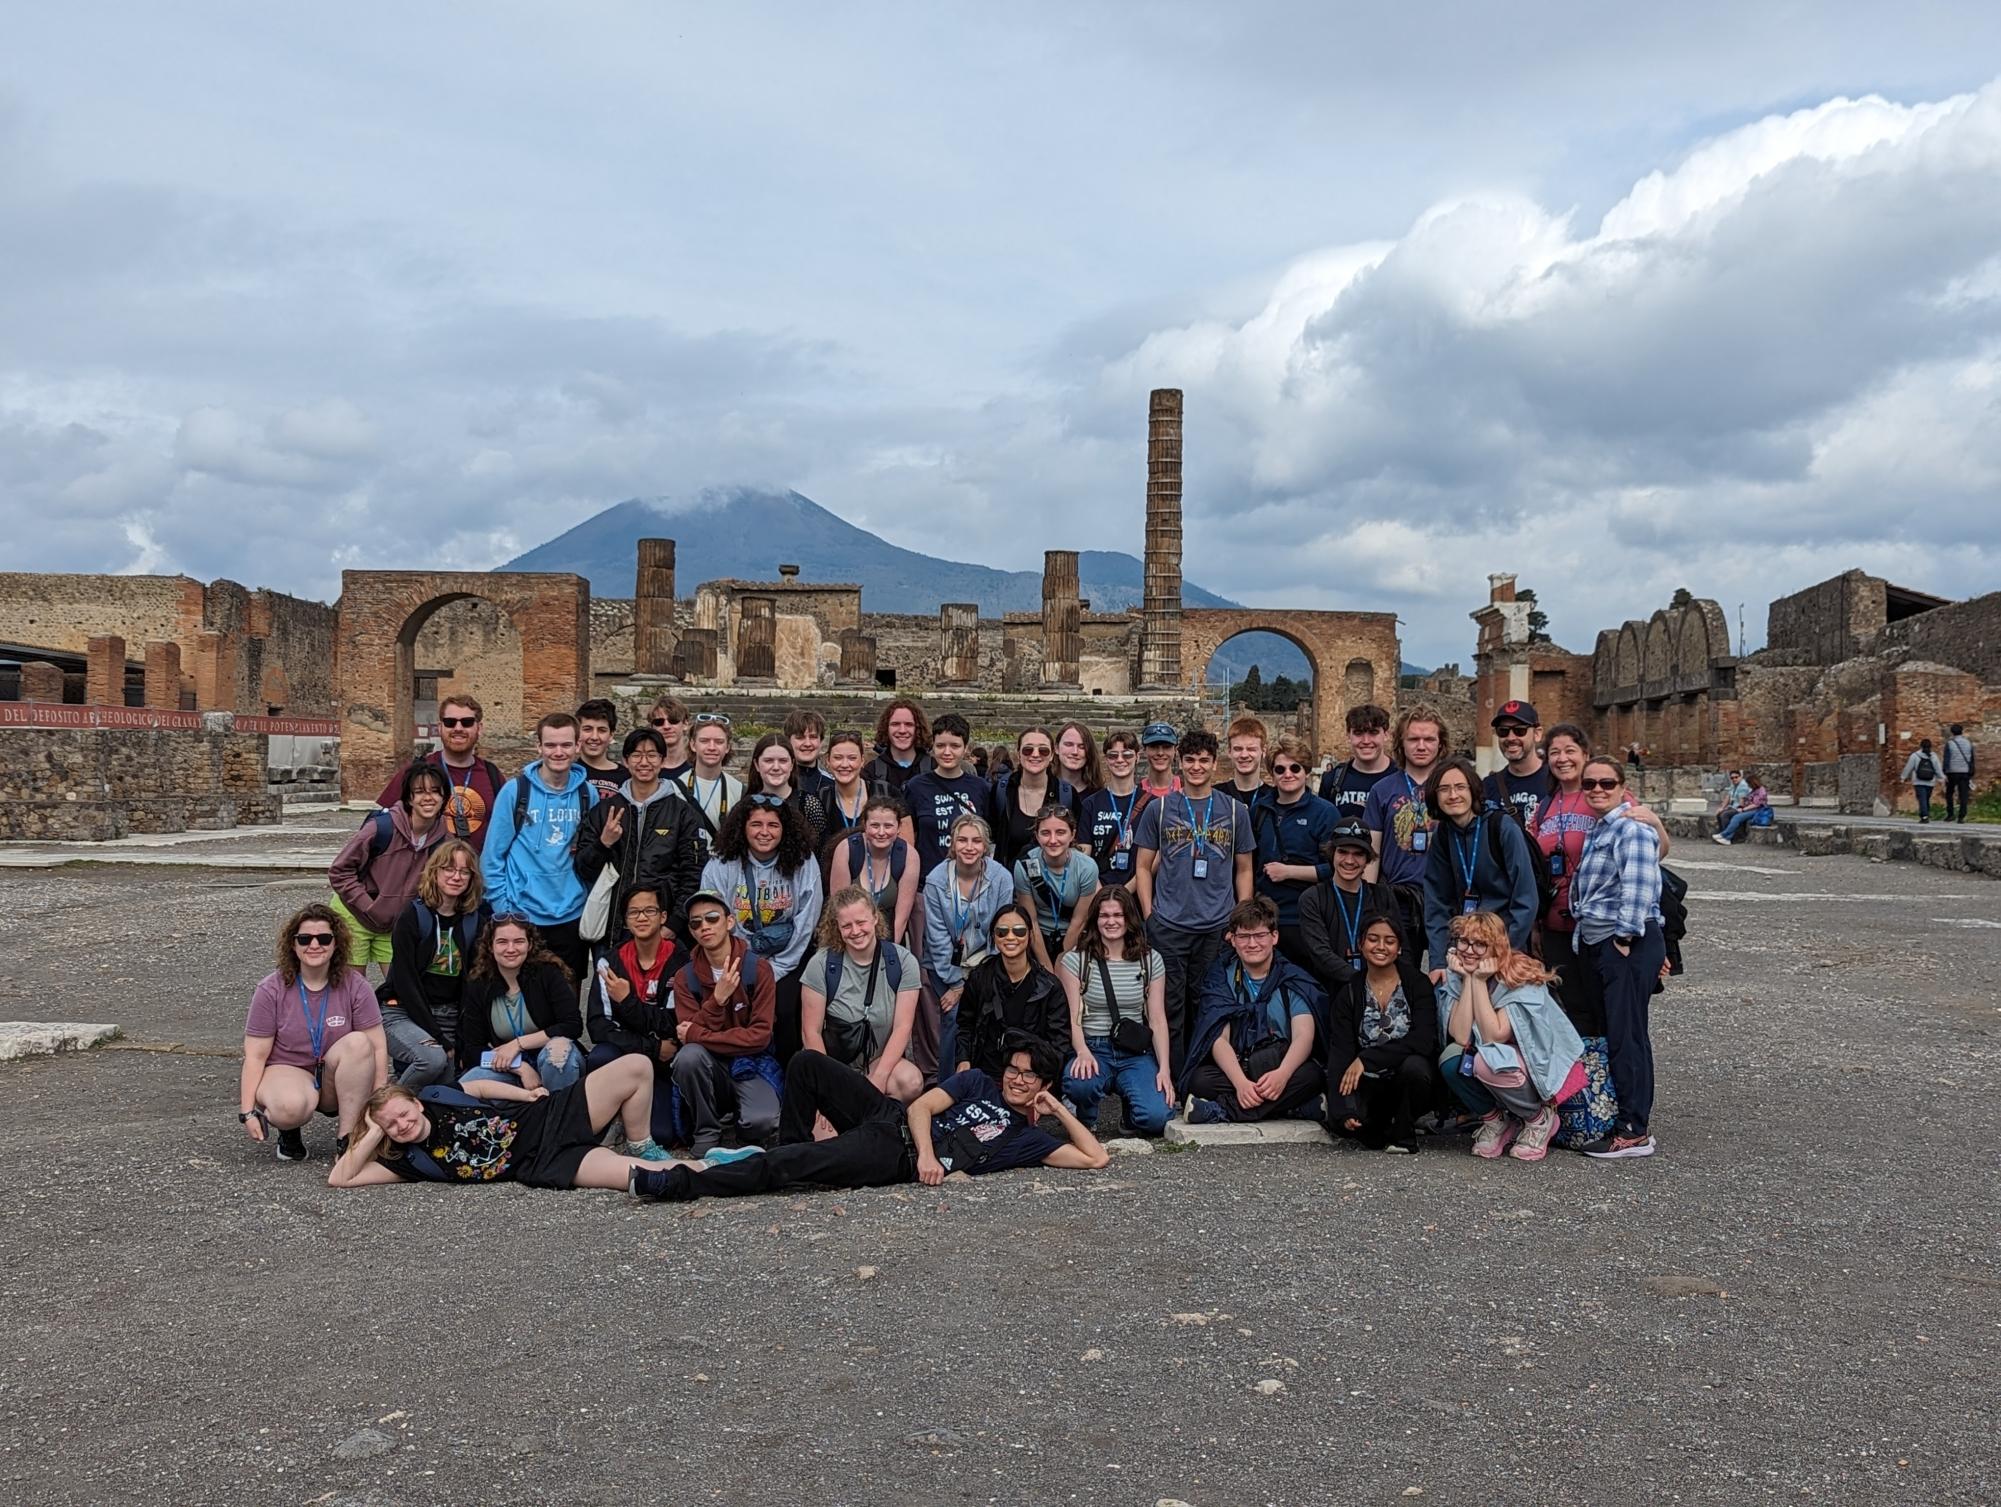 Latin students pose for a group photo in front of historical ruins in Italy. From March 13 to March 23, the Latin department traversed cities in Italy to immerse students in an educational experience of a lifetime. “I enjoyed being able to learn about the different cultures. [The trip] encouraged me to see other peoples lifestyle and learn more about different histories,” senior Suraiya Saroar said. 